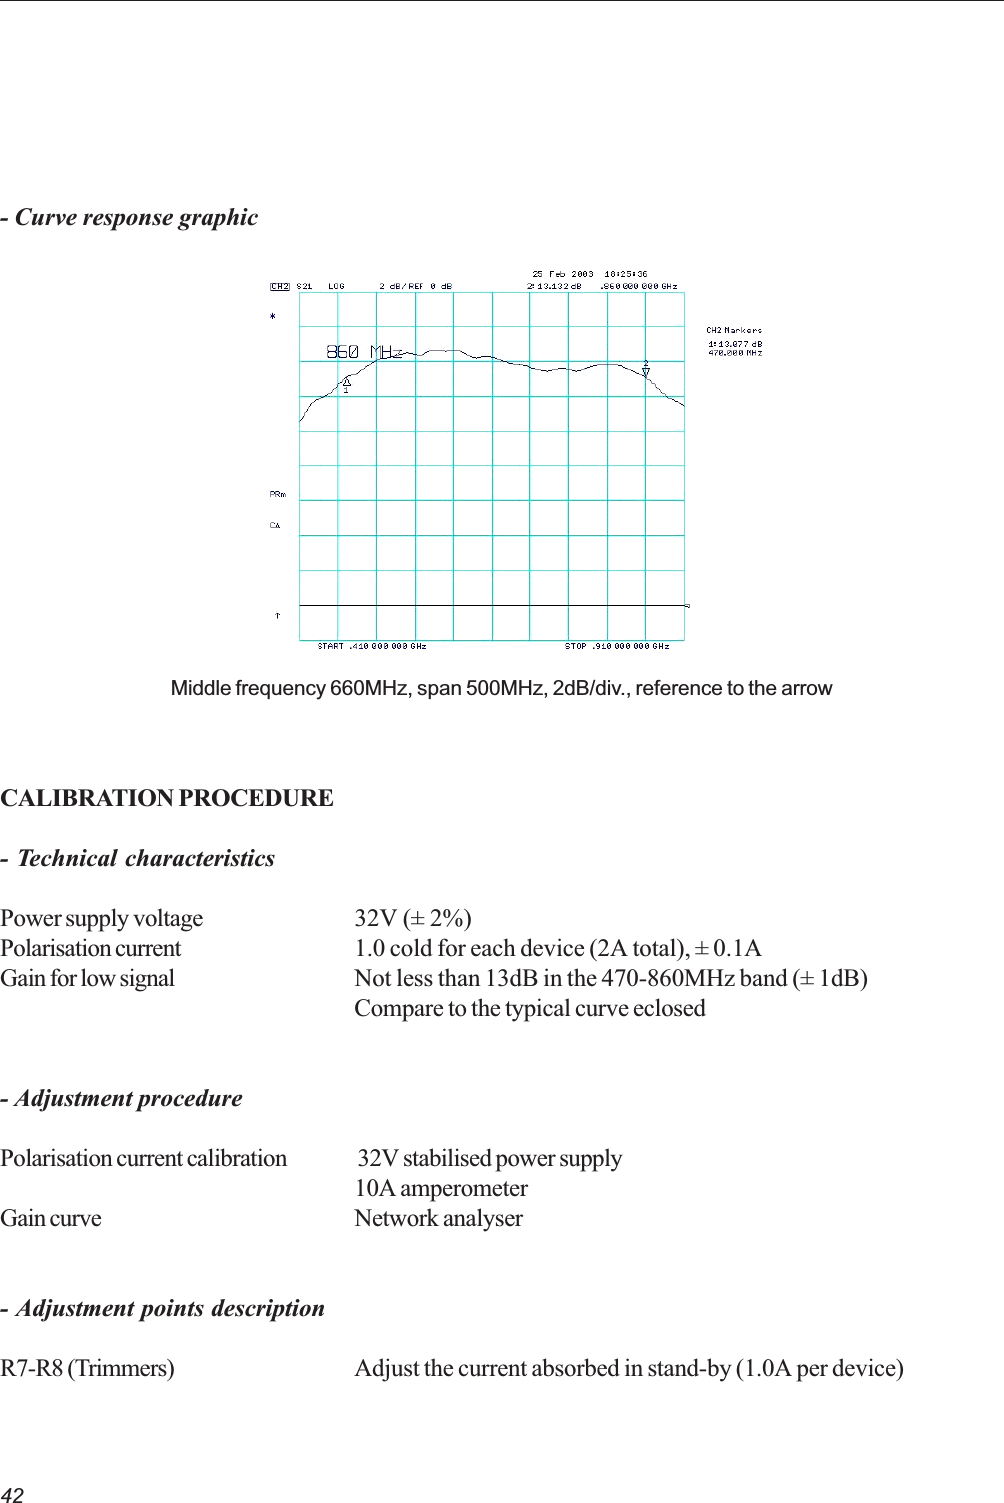 42CALIBRATION PROCEDURE- Technical characteristicsPower supply voltage 32V (± 2%)Polarisation current 1.0 cold for each device (2A total), ± 0.1AGain for low signal Not less than 13dB in the 470-860MHz band (± 1dB)Compare to the typical curve eclosed- Adjustment procedurePolarisation current calibration 32V stabilised power supply10A amperometerGain curve Network analyser- Adjustment points descriptionR7-R8 (Trimmers) Adjust the current absorbed in stand-by (1.0A per device)Middle frequency 660MHz, span 500MHz, 2dB/div., reference to the arrow- Curve response graphic